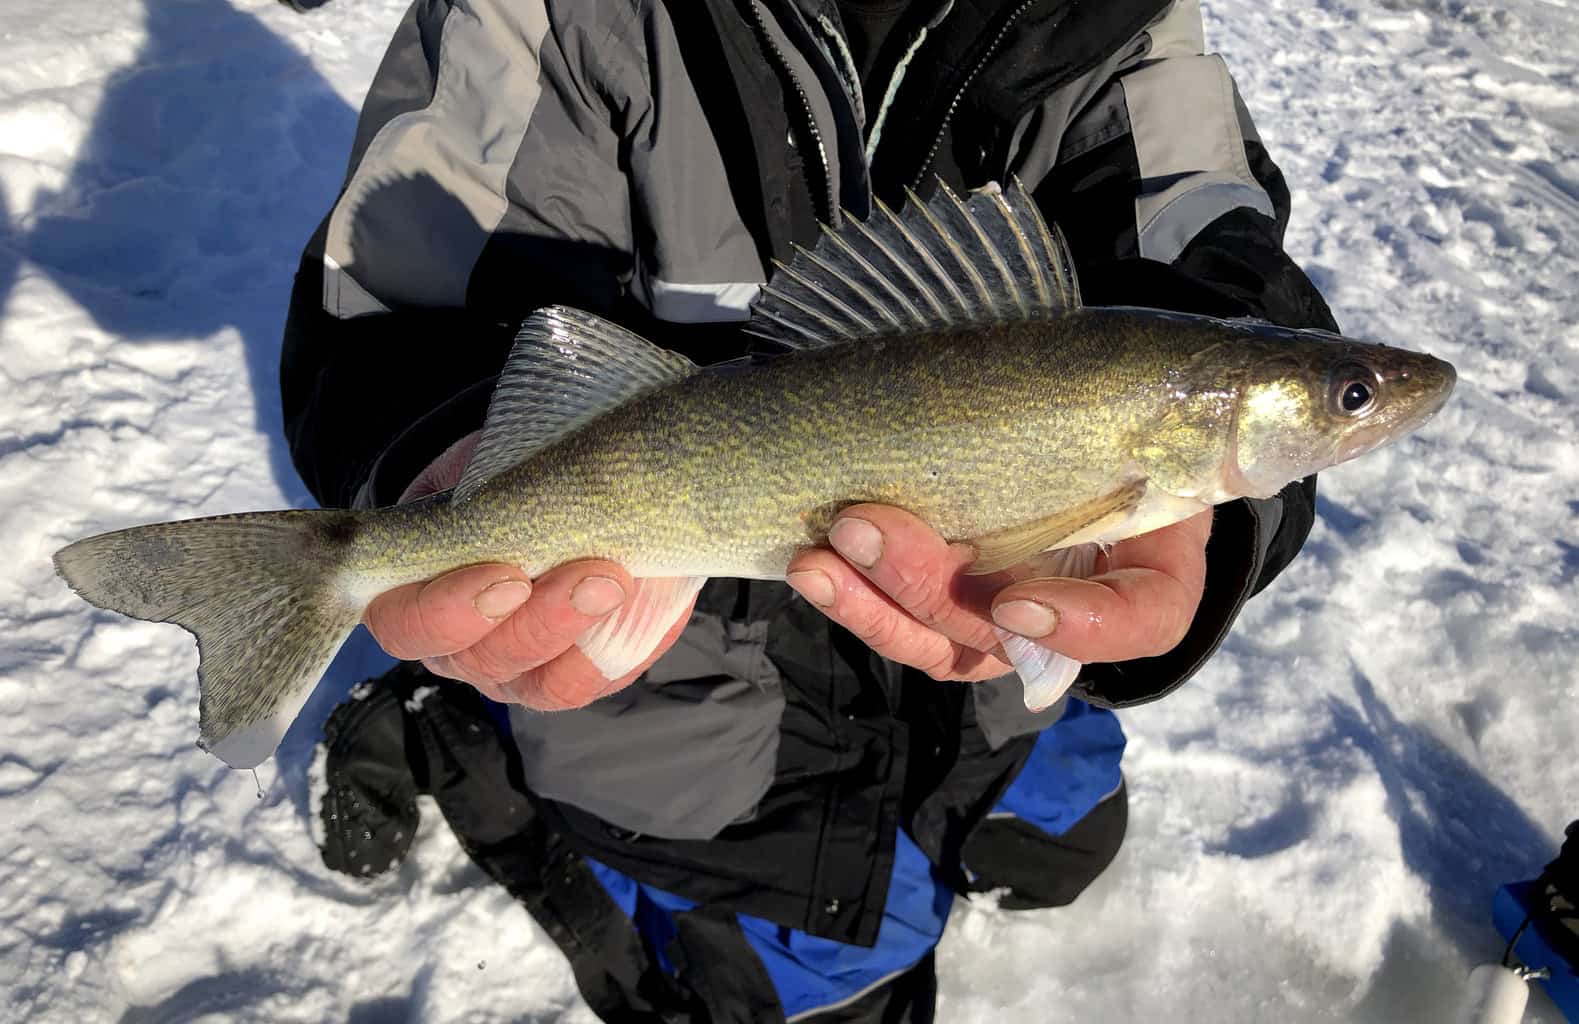 Close-up of an angler's hands holding a walleye caught while ice fishing in Wisconsin, with the surface of a frozen lake behind.